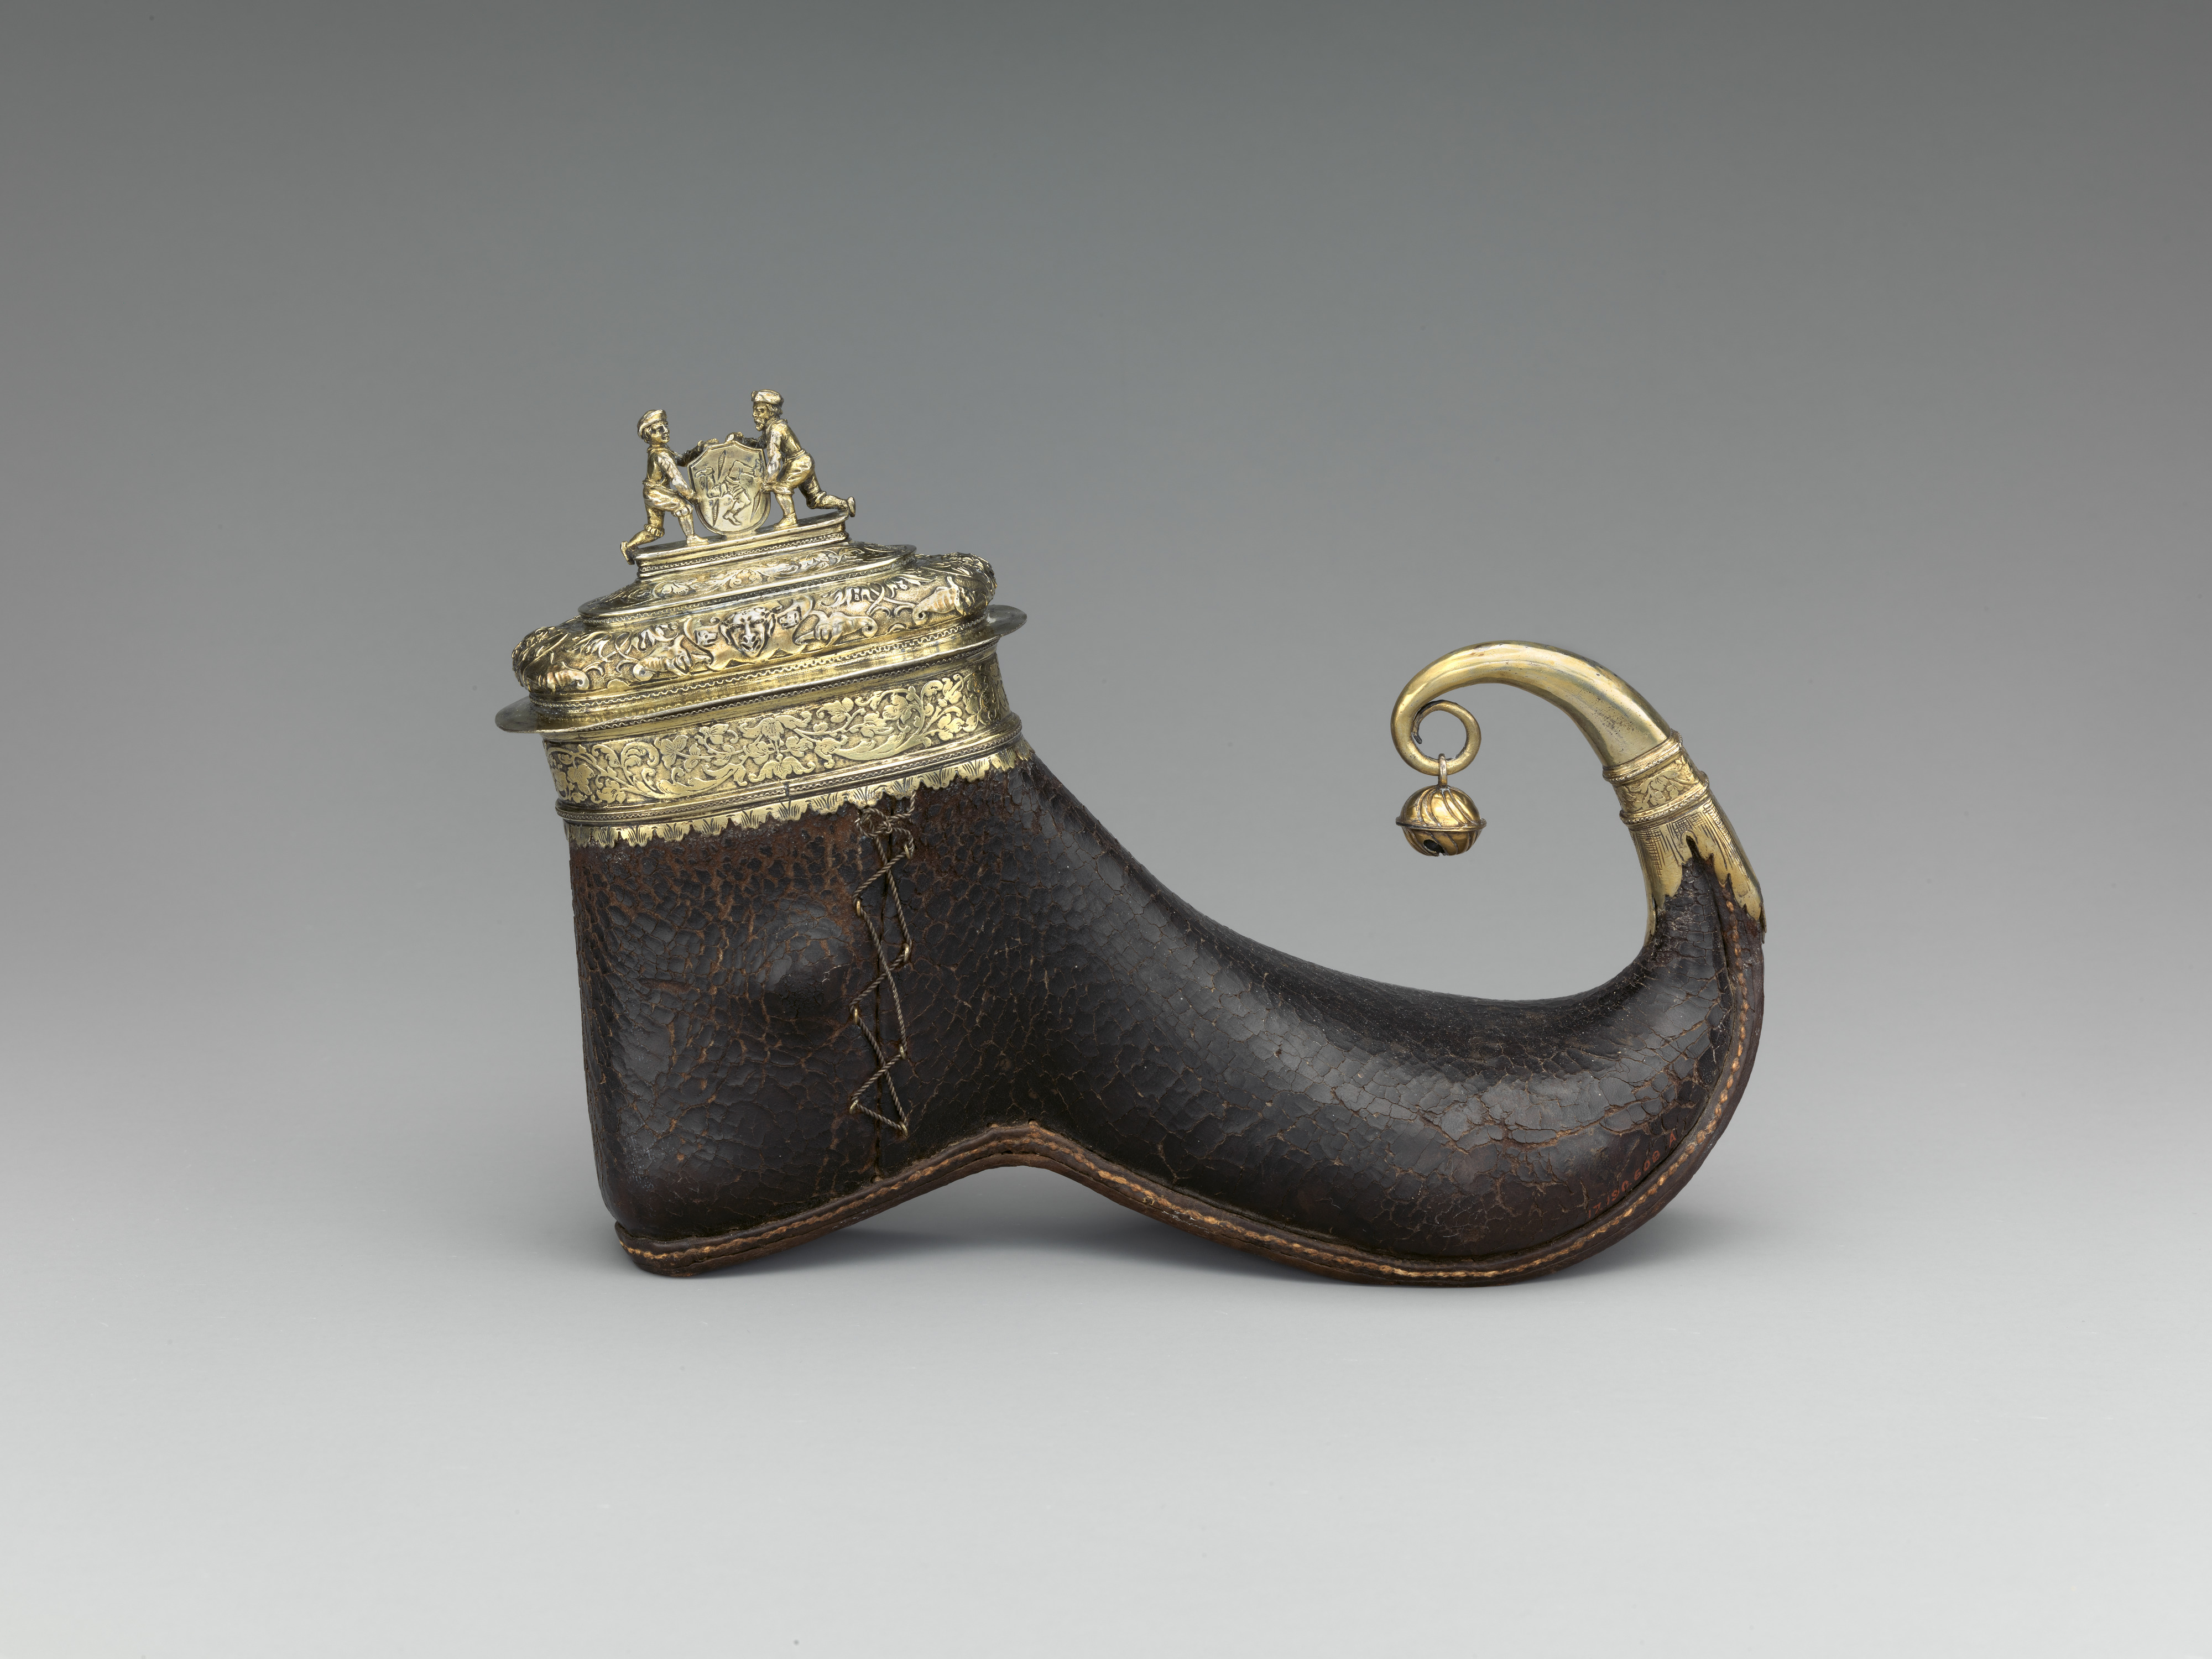 Cup in the form of a shoe | German | The Metropolitan Museum of Art